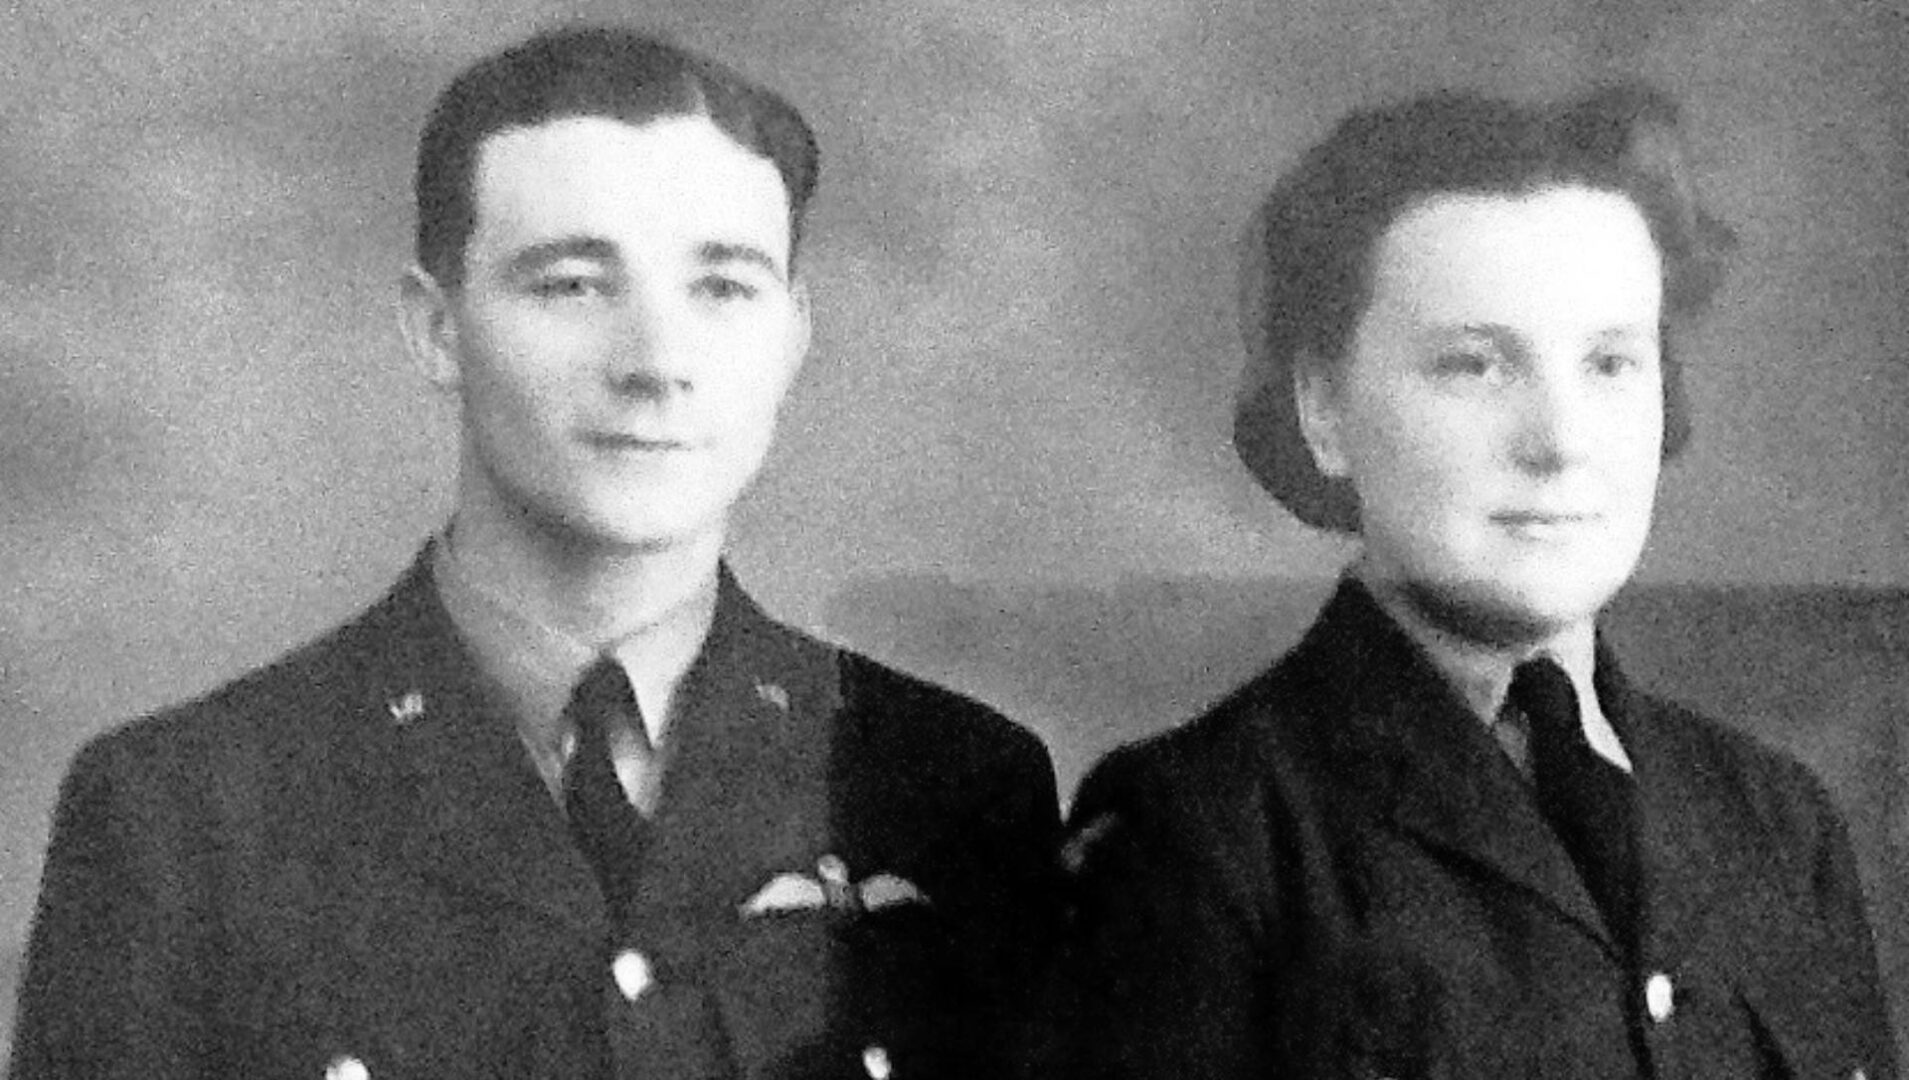 Flying Officer Samuel Cecil Morrison of Creggan Road, Derry~Londonderry photographed with Margaret Elizabeth 'Betty' Morrison (née Barclay) on their wedding day.